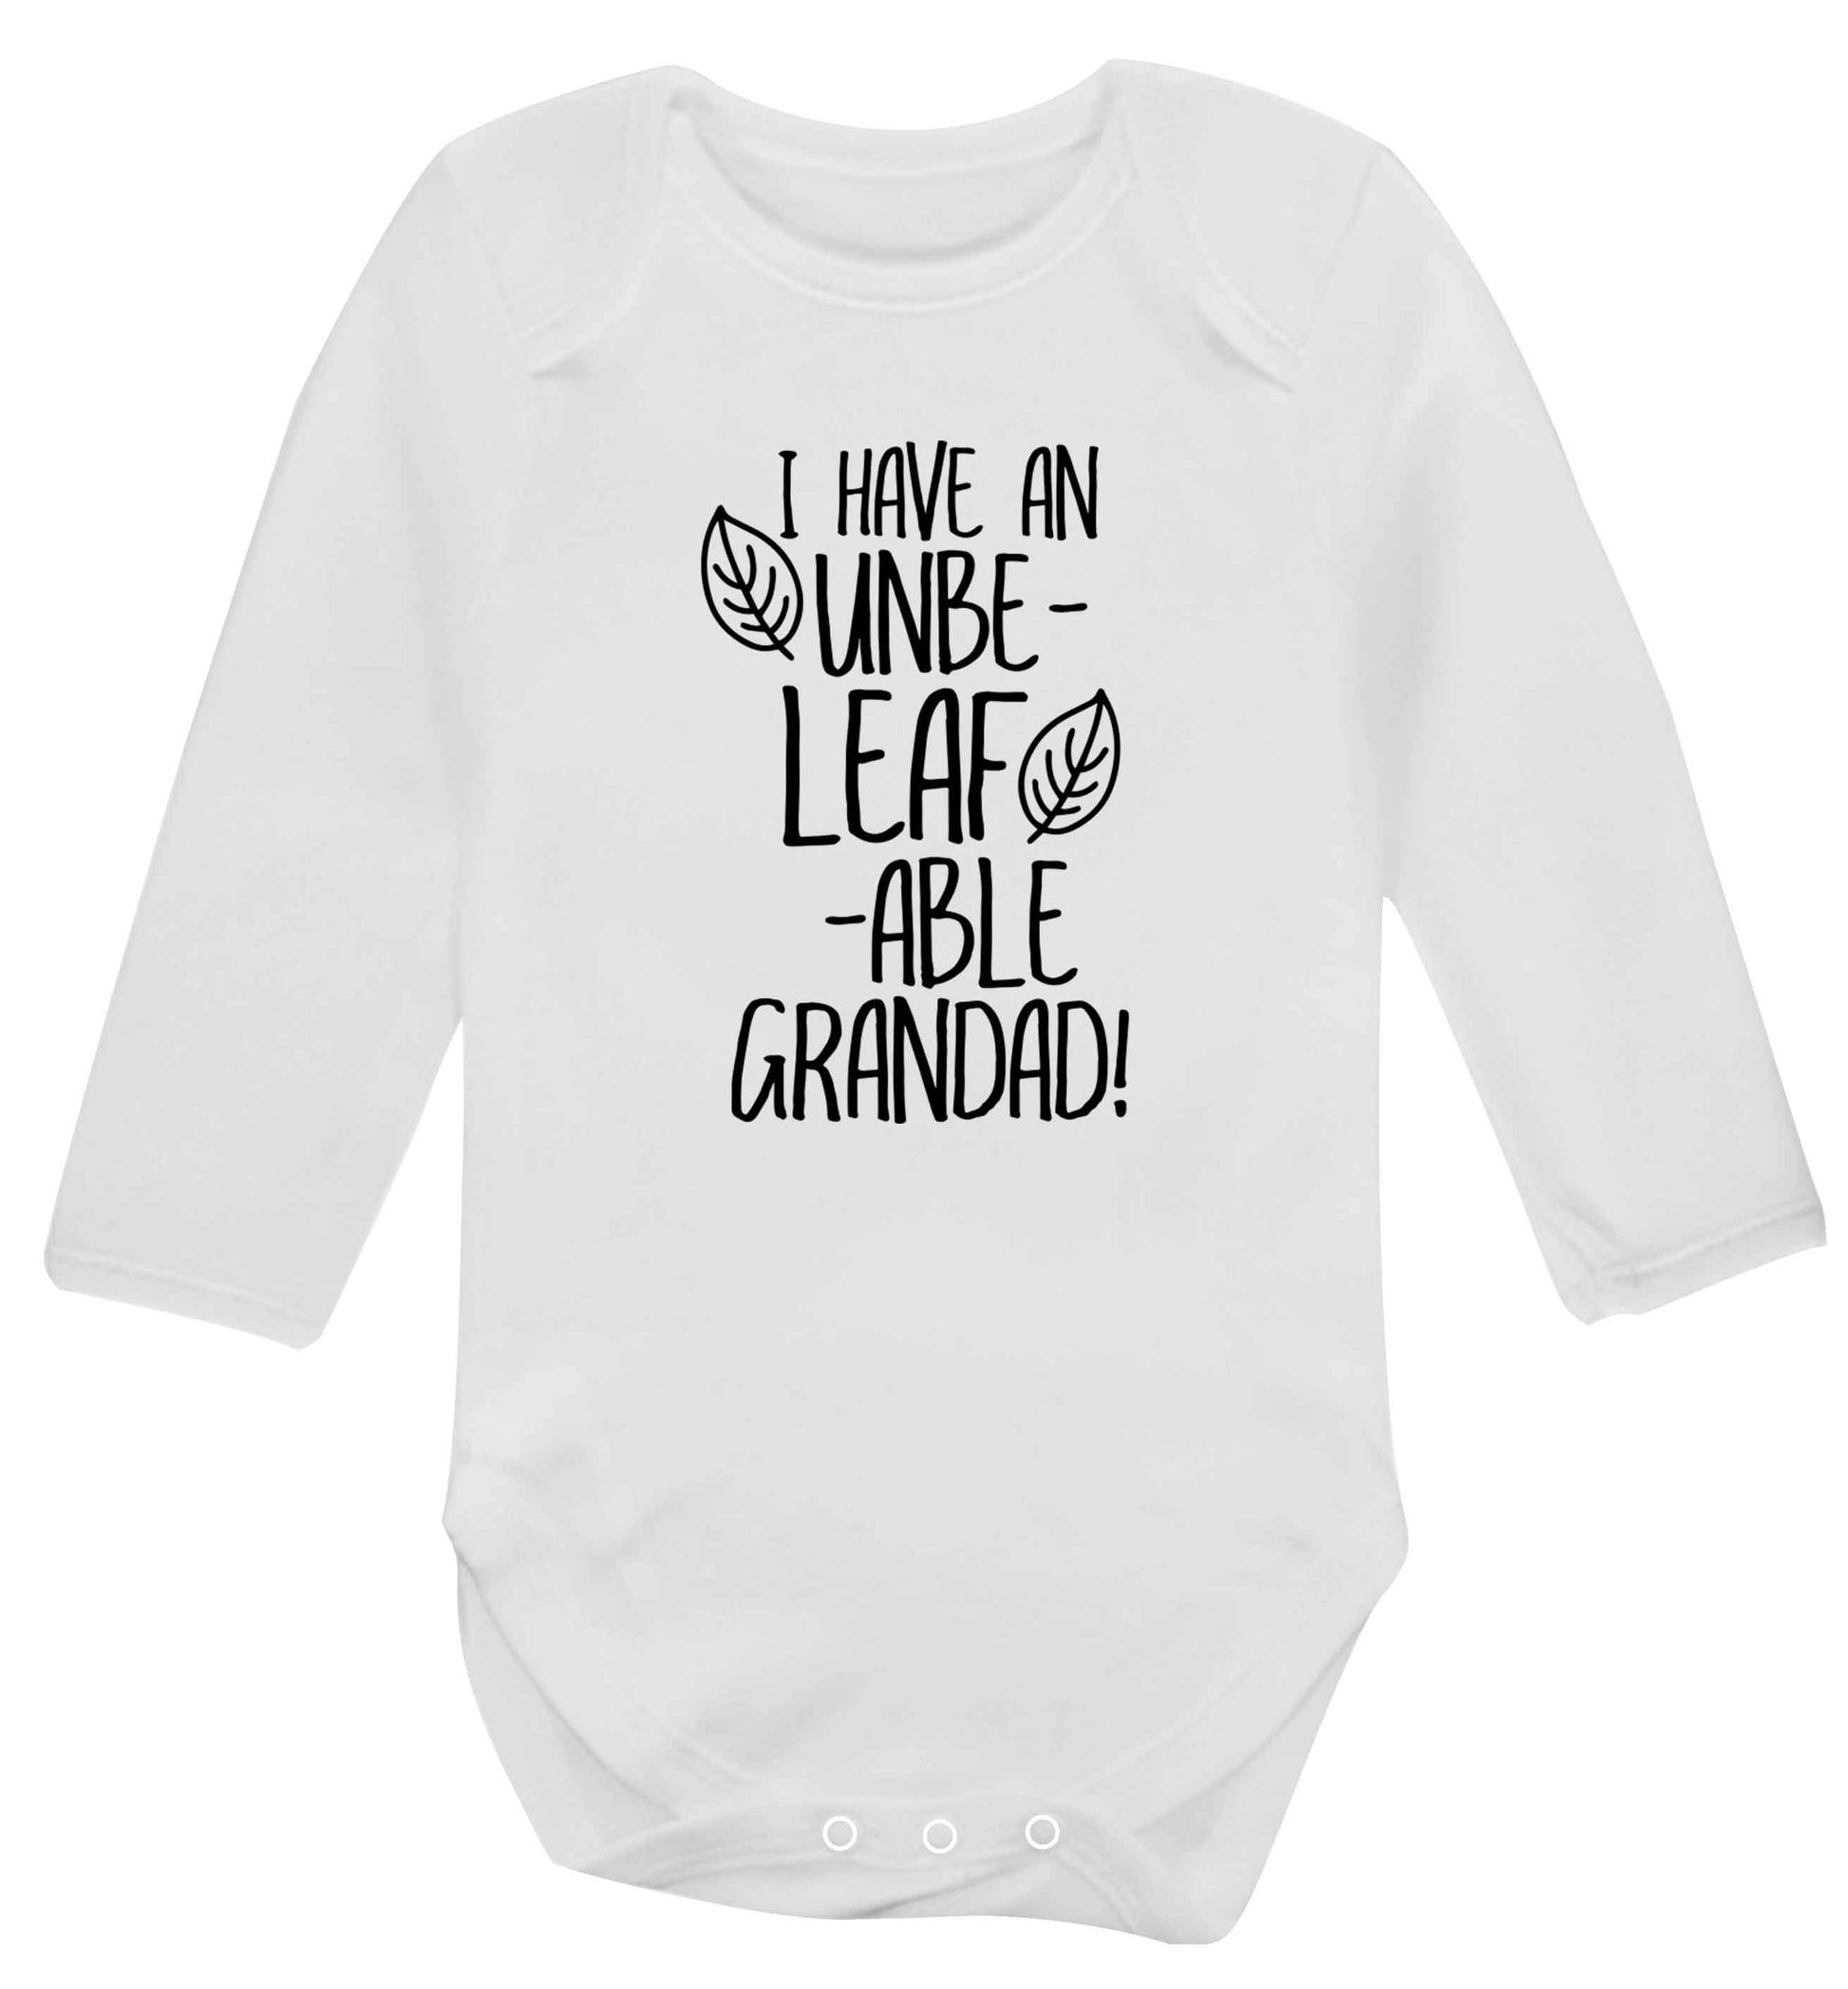 I have an unbe-leaf-able grandad Baby Vest long sleeved white 6-12 months